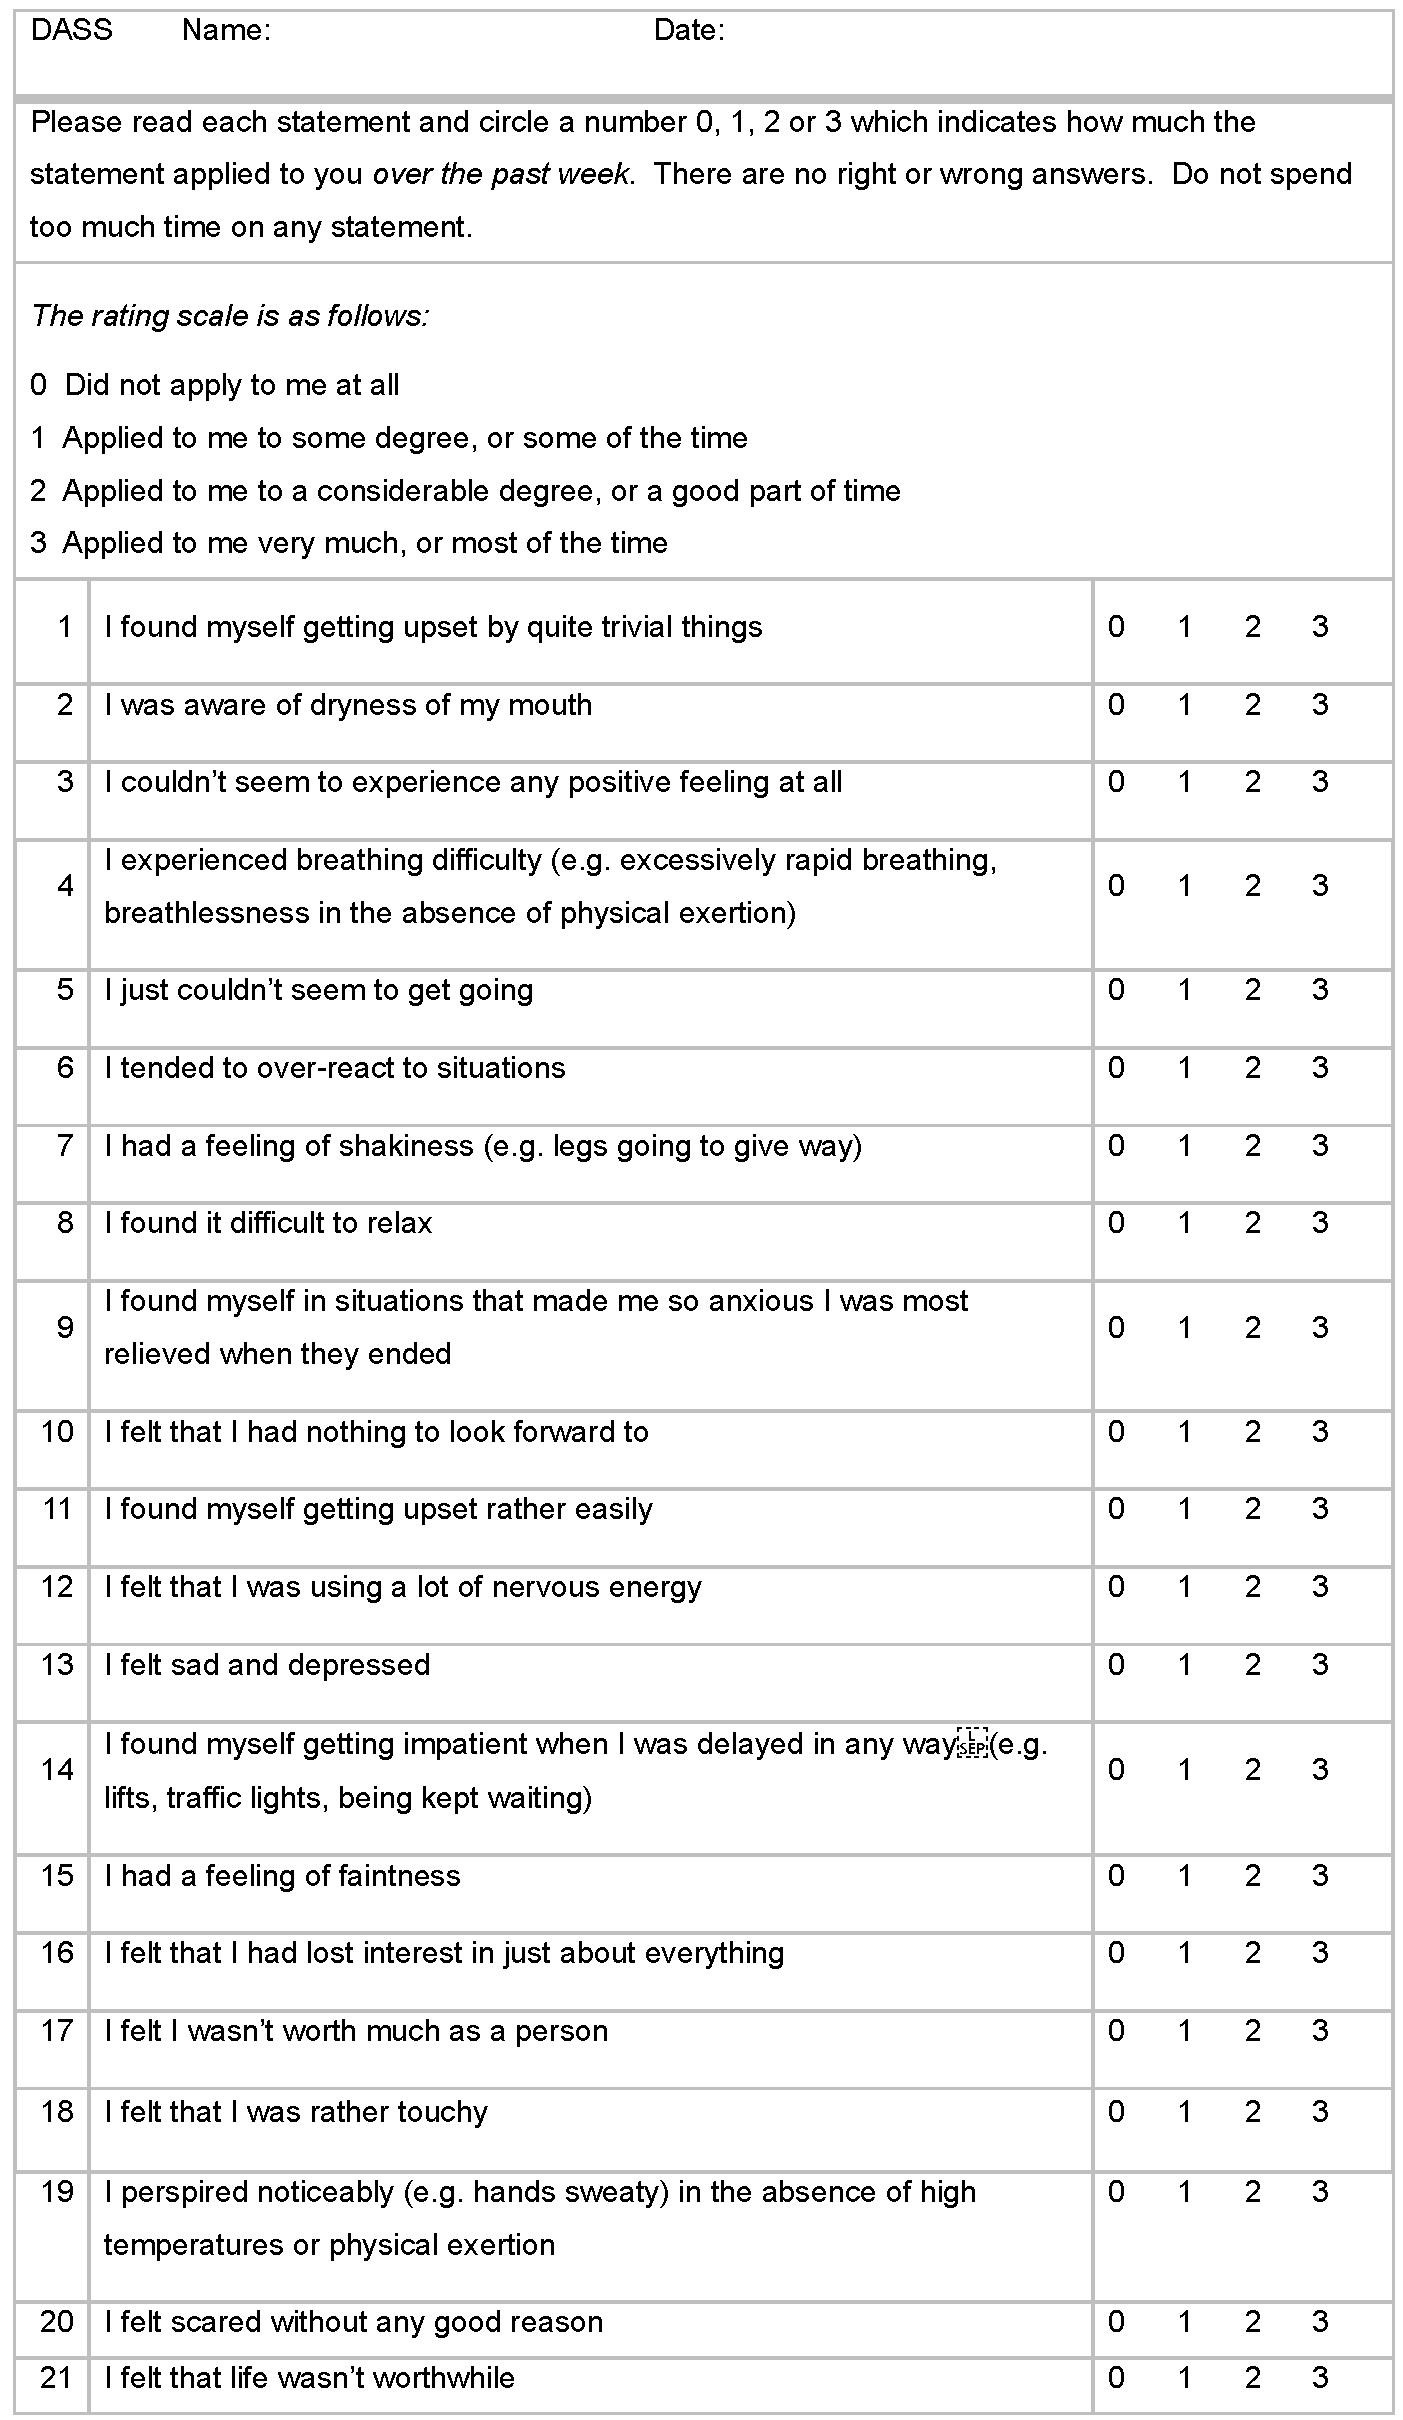 image of Depression, Anxiety and Stress Scales questionnaire